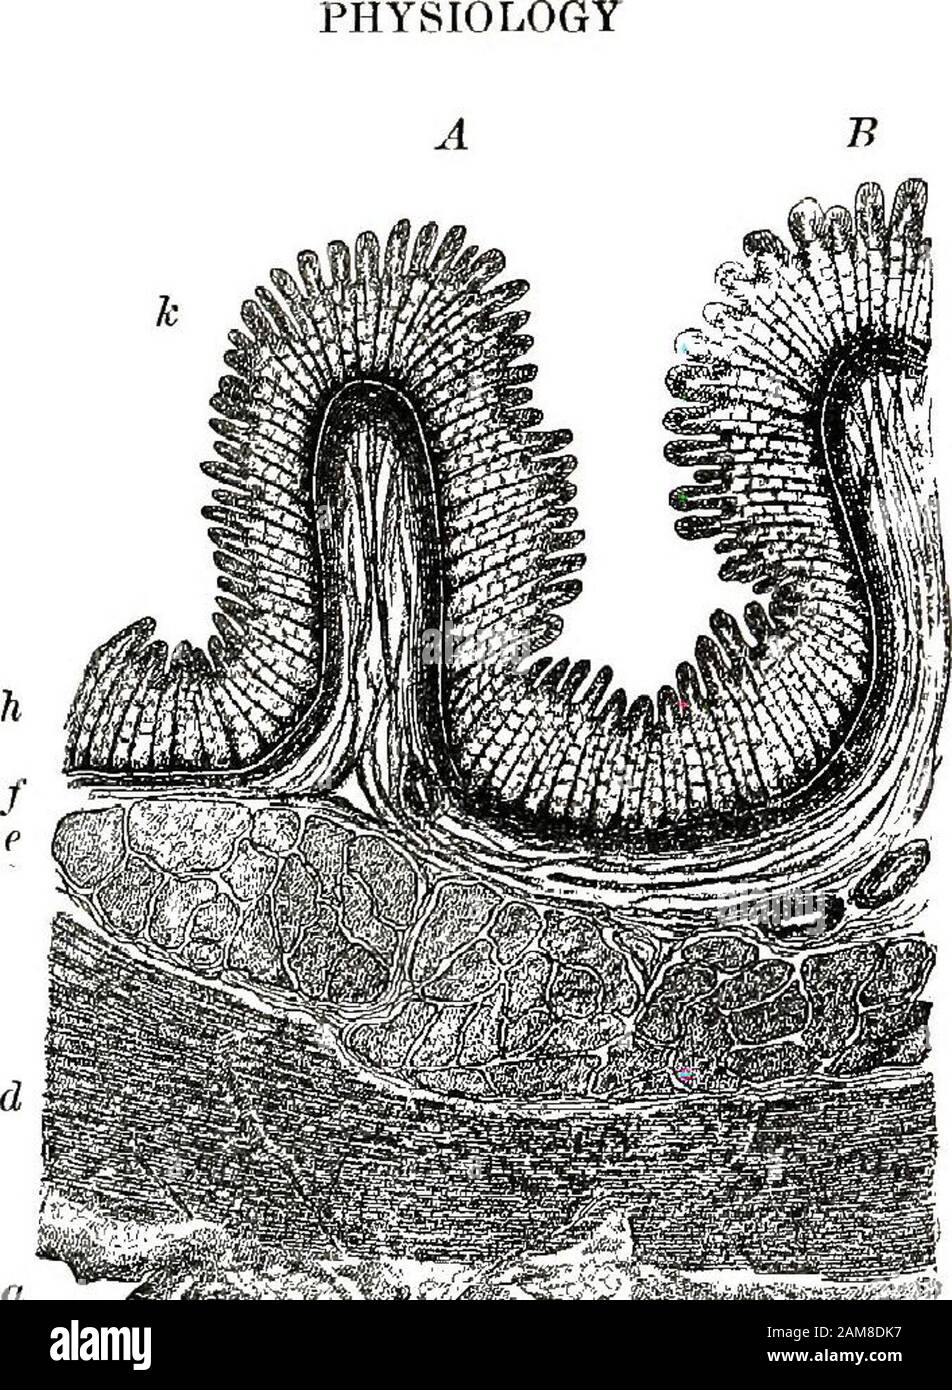 Elementary anatomy, physiology and hygiene for higher grammar grades . Fio. 26. — A pepticgland,from cardiacend of stomach.Very much magni-iied. A, central orchief cells, whichmake pepsin; B,border or parietalcells, which makeacid. [From Mil-lers Histology. 96. a ^ « 4L ,% . Fig, 27. — A very much magnified picture of a slice tlirough the small intes-tine. [Benda.] Notice the outer strong coat of connective tissue (a), themuscular coat (d lengthwise, and e circular), the suhmucous coat of con-nective tissue (/). The mucous memhrane (A) with two very large folds(jl and B) which run crosswise a Stock Photo